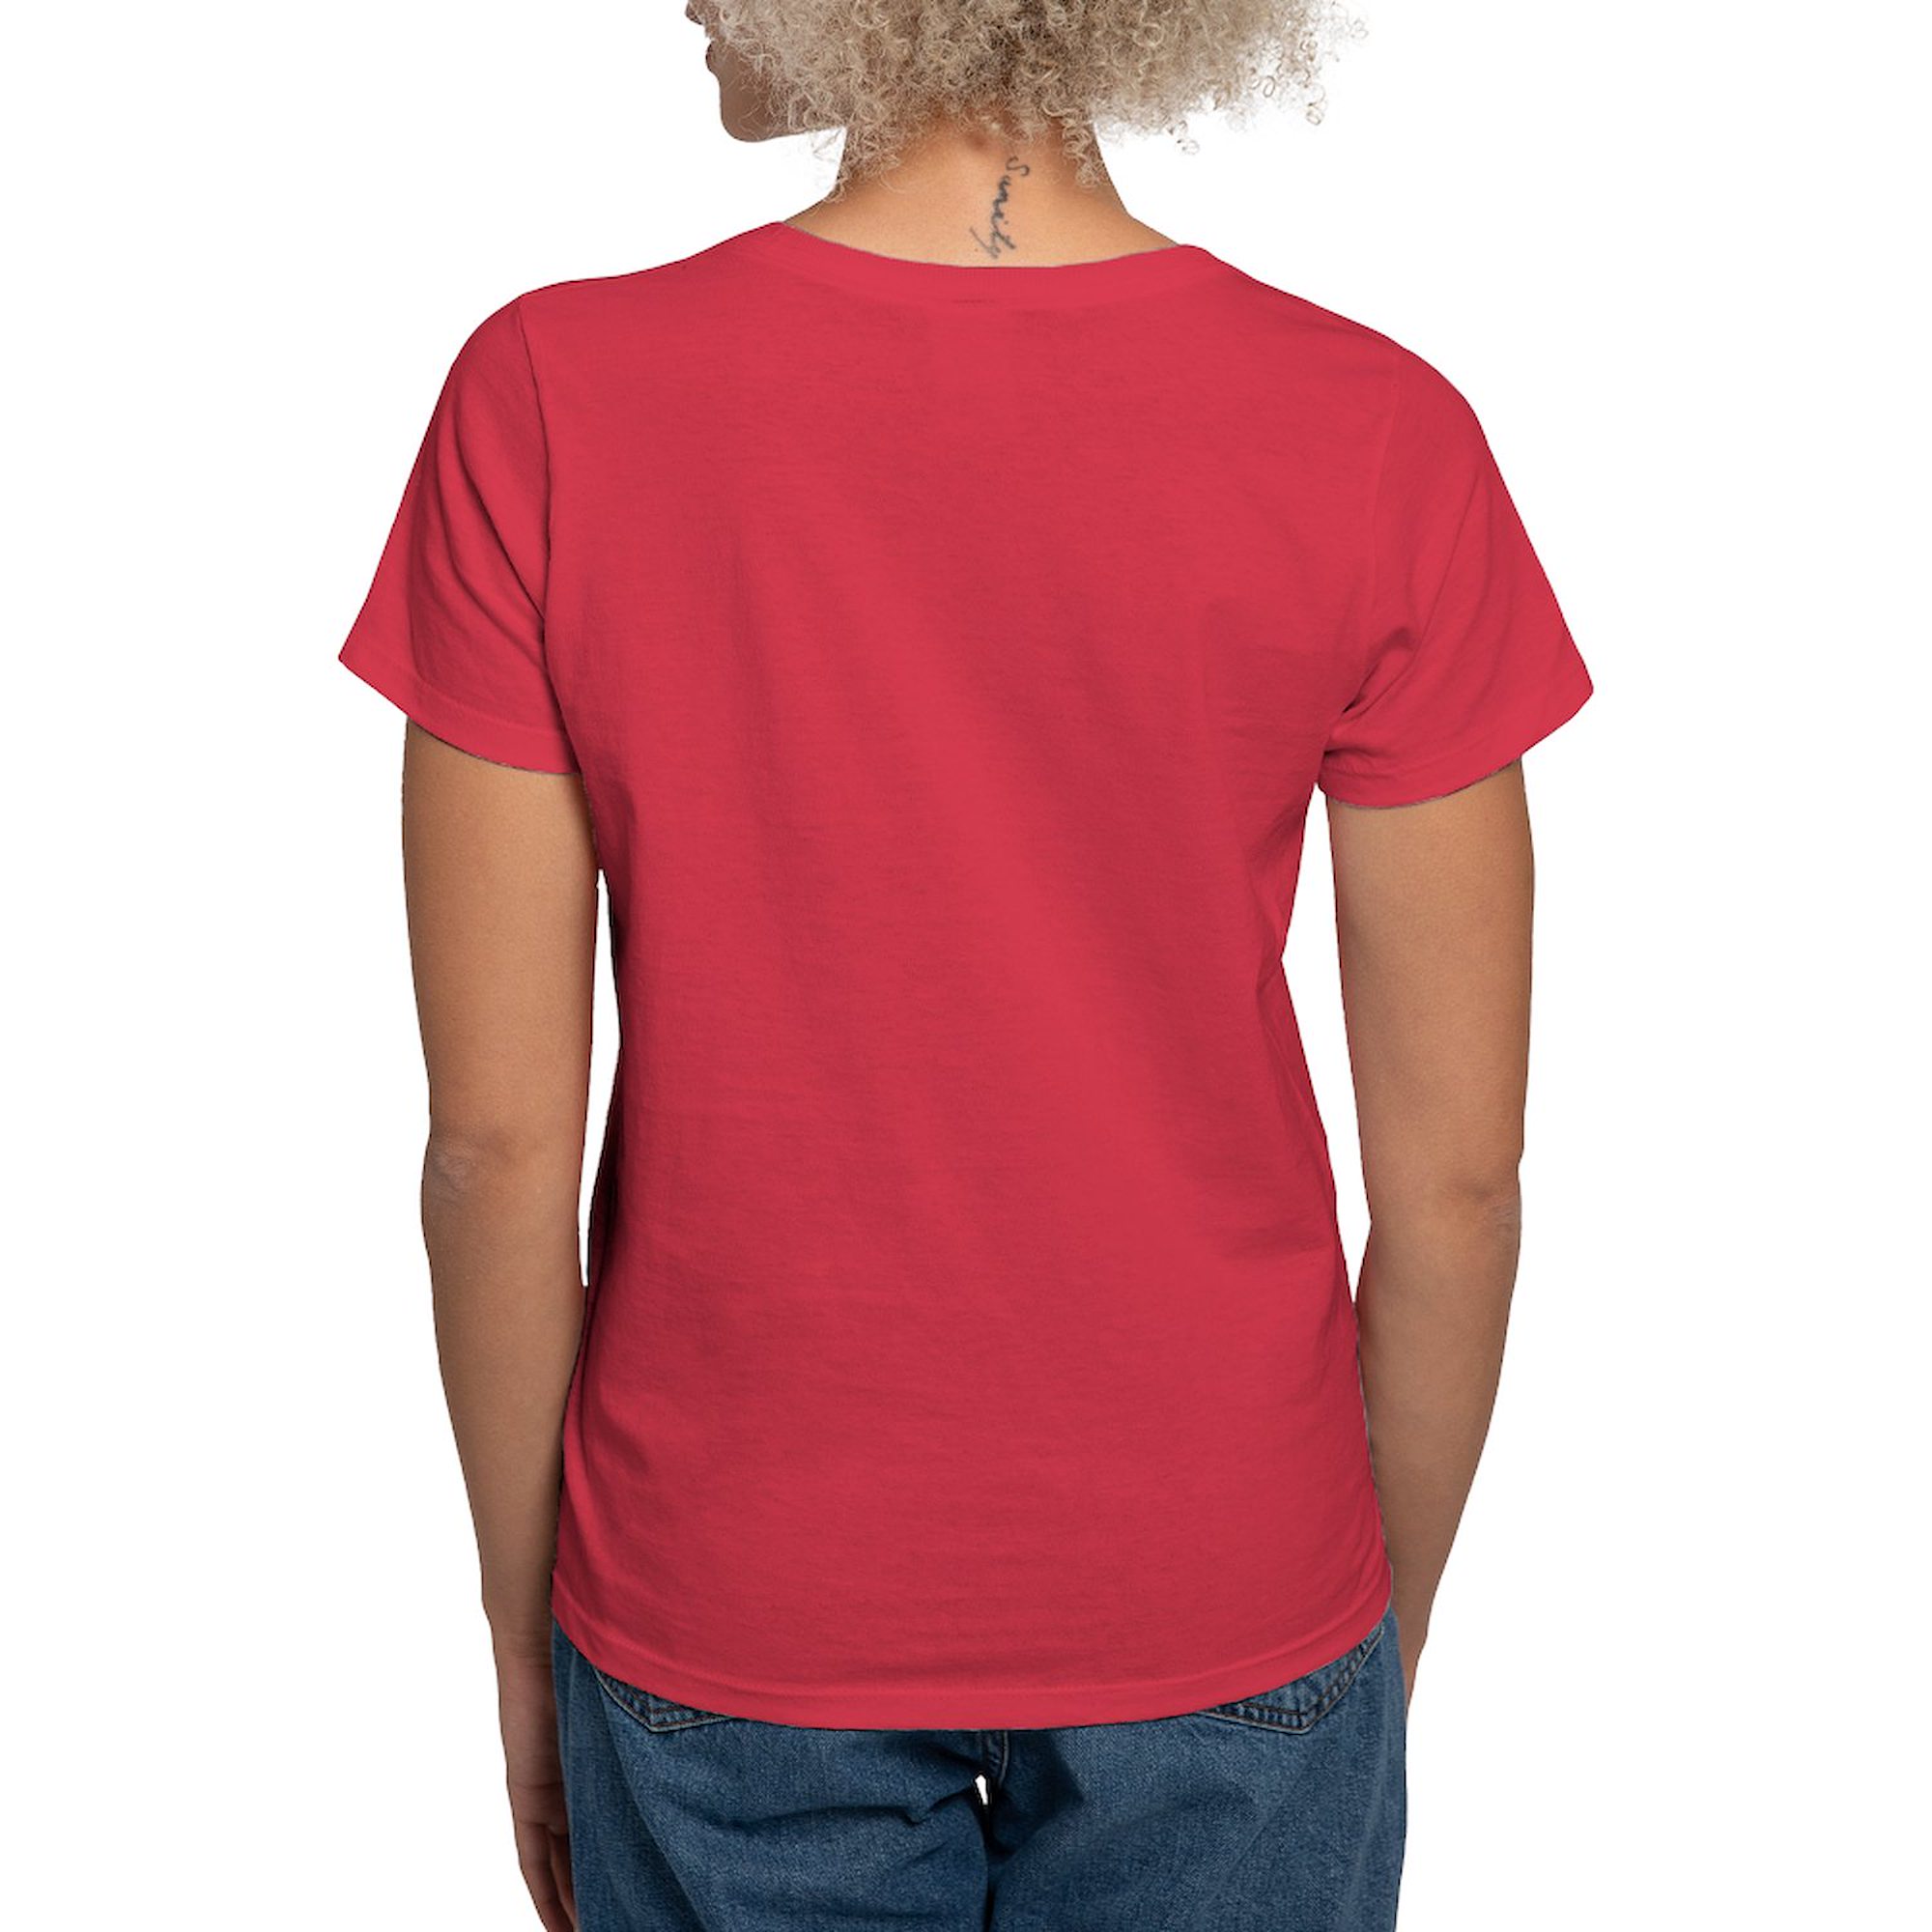 CafePress - Anthro1 T Shirt - Women's Traditional Fit Dark T-Shirt - image 2 of 4